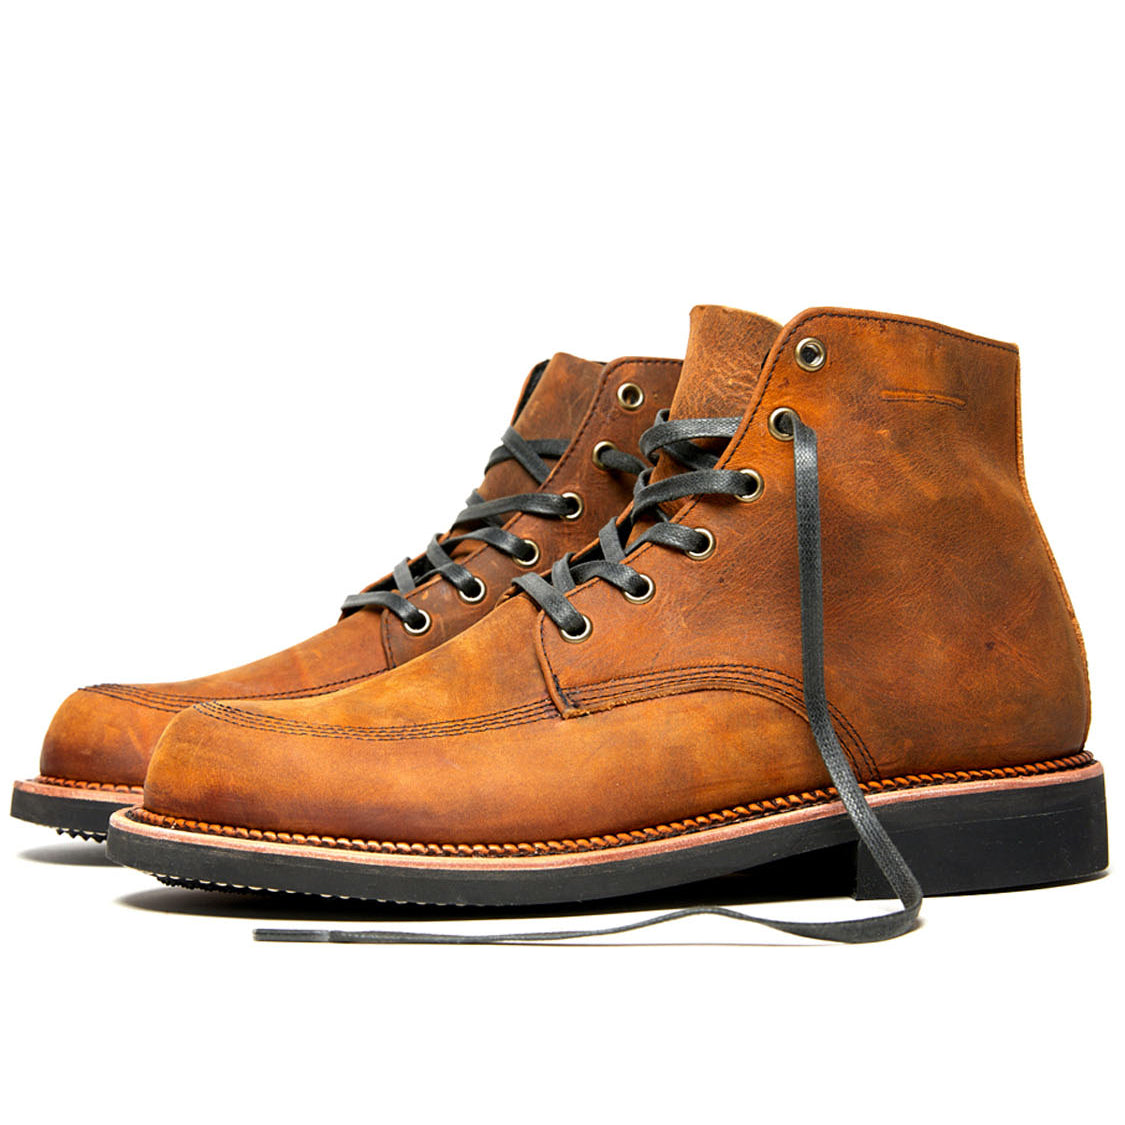 A comfortable Davis boot by Broken Homme on a white background.